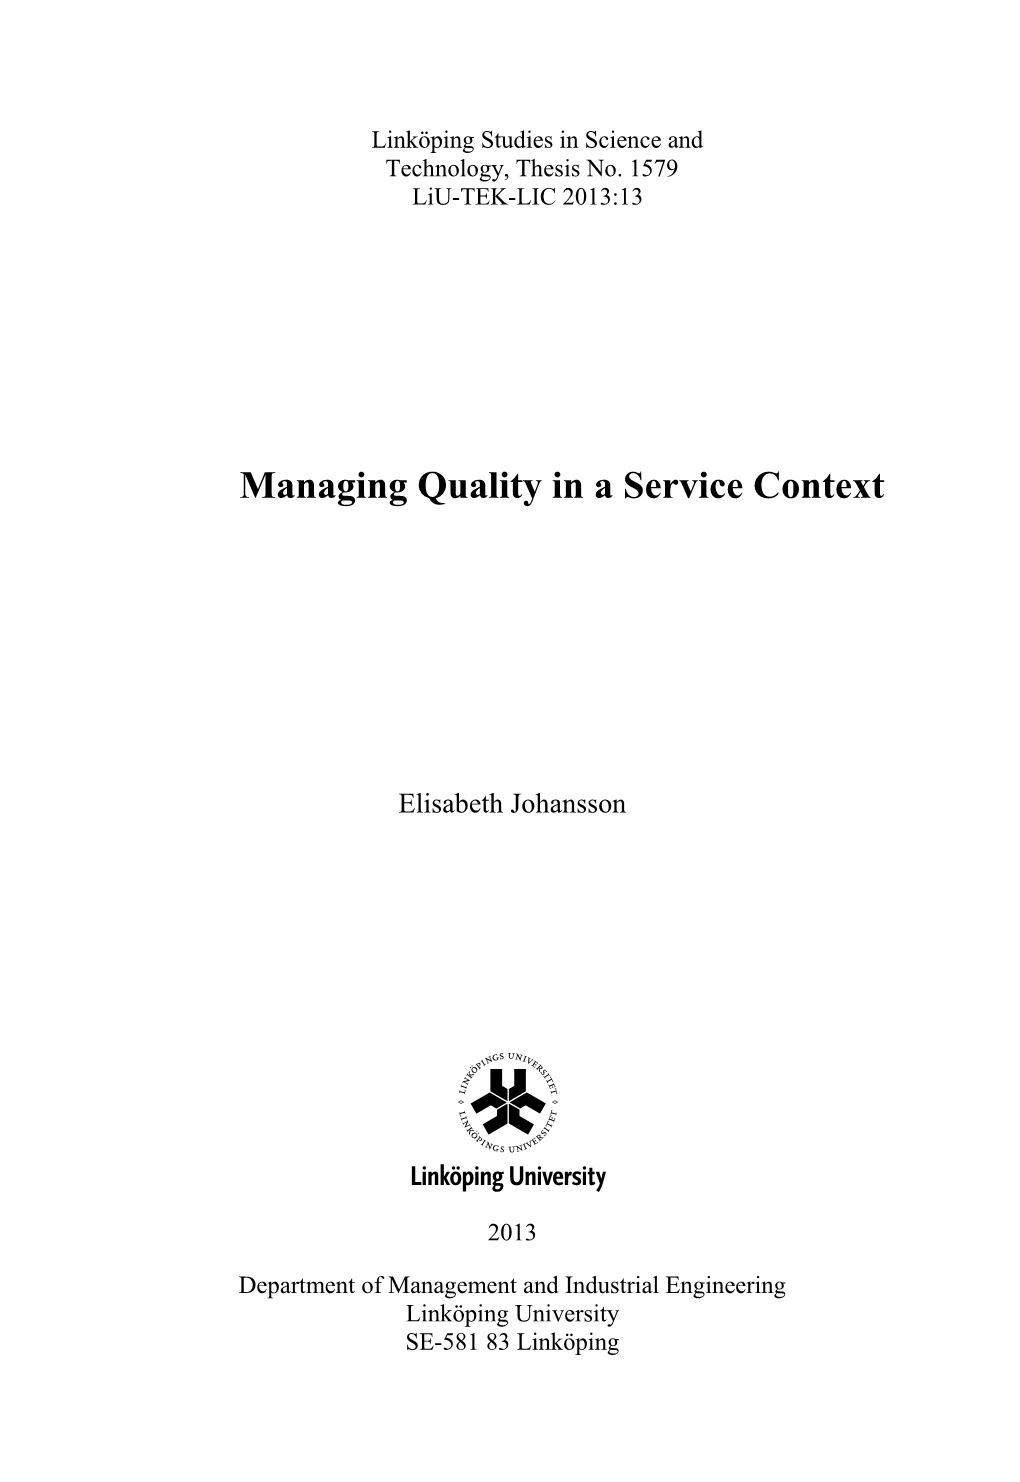 Managing Quality in a Service Context